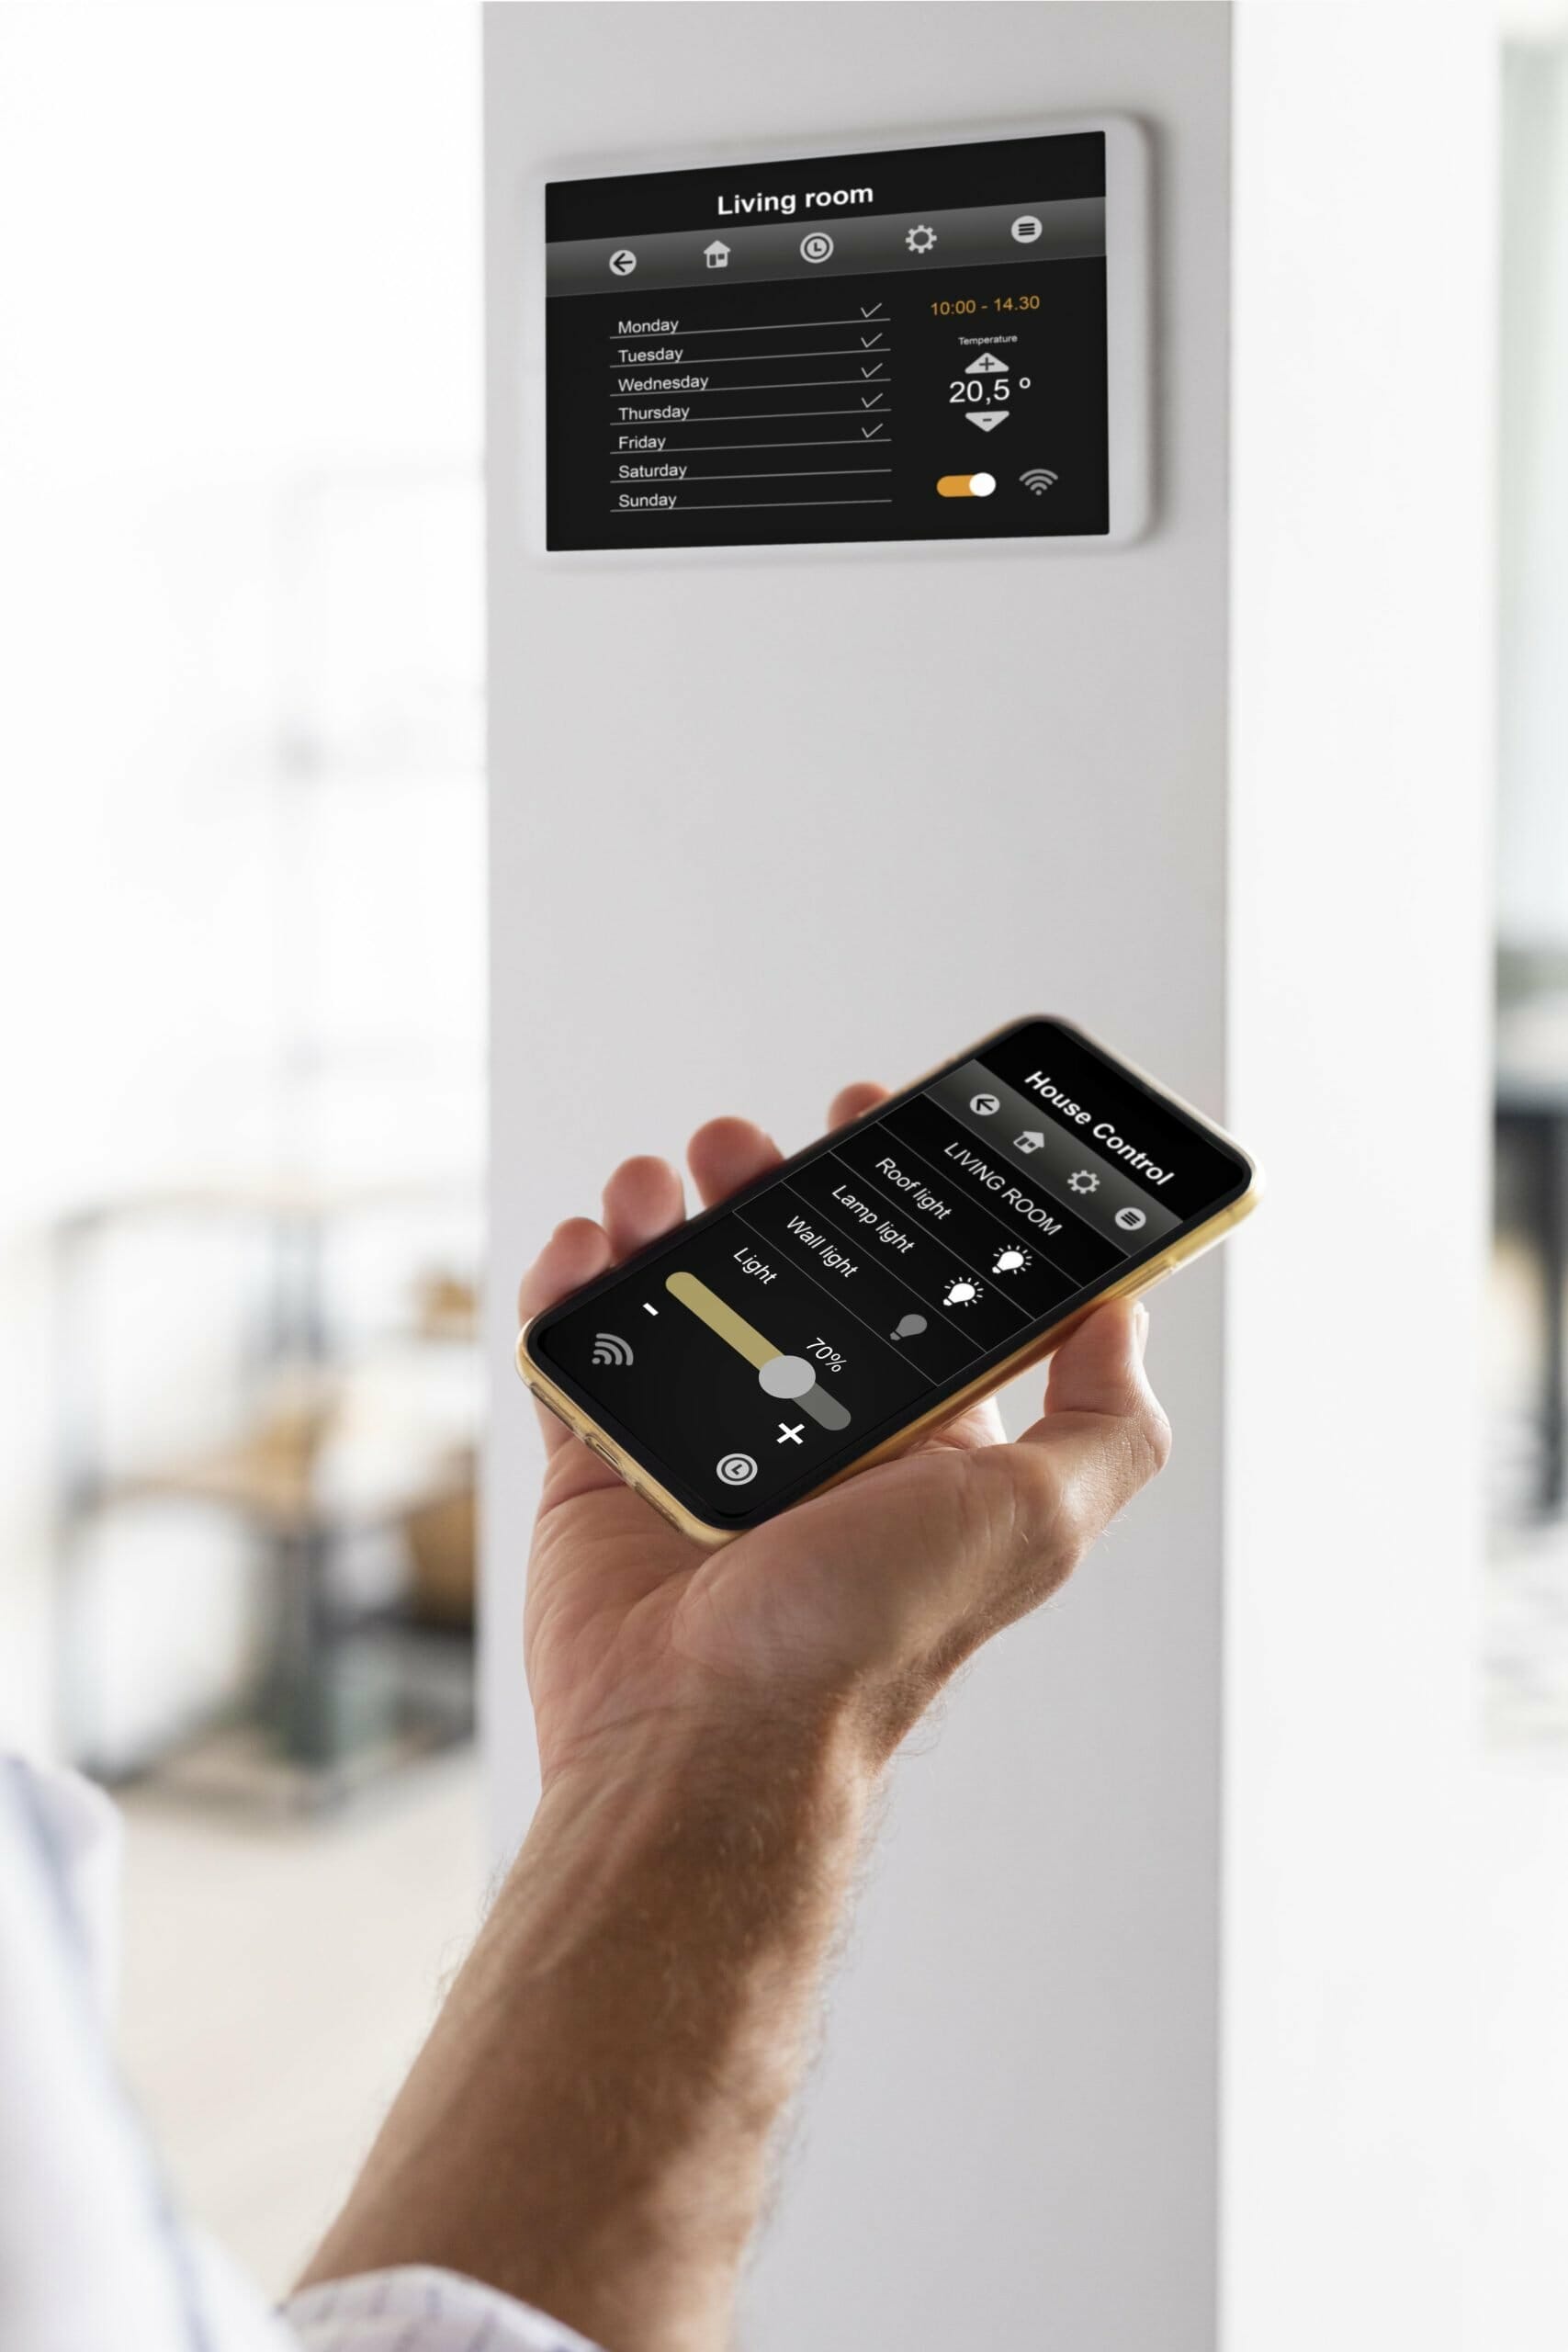 Integrating Smart Home Automation Systems with Existing Home Infrastructure